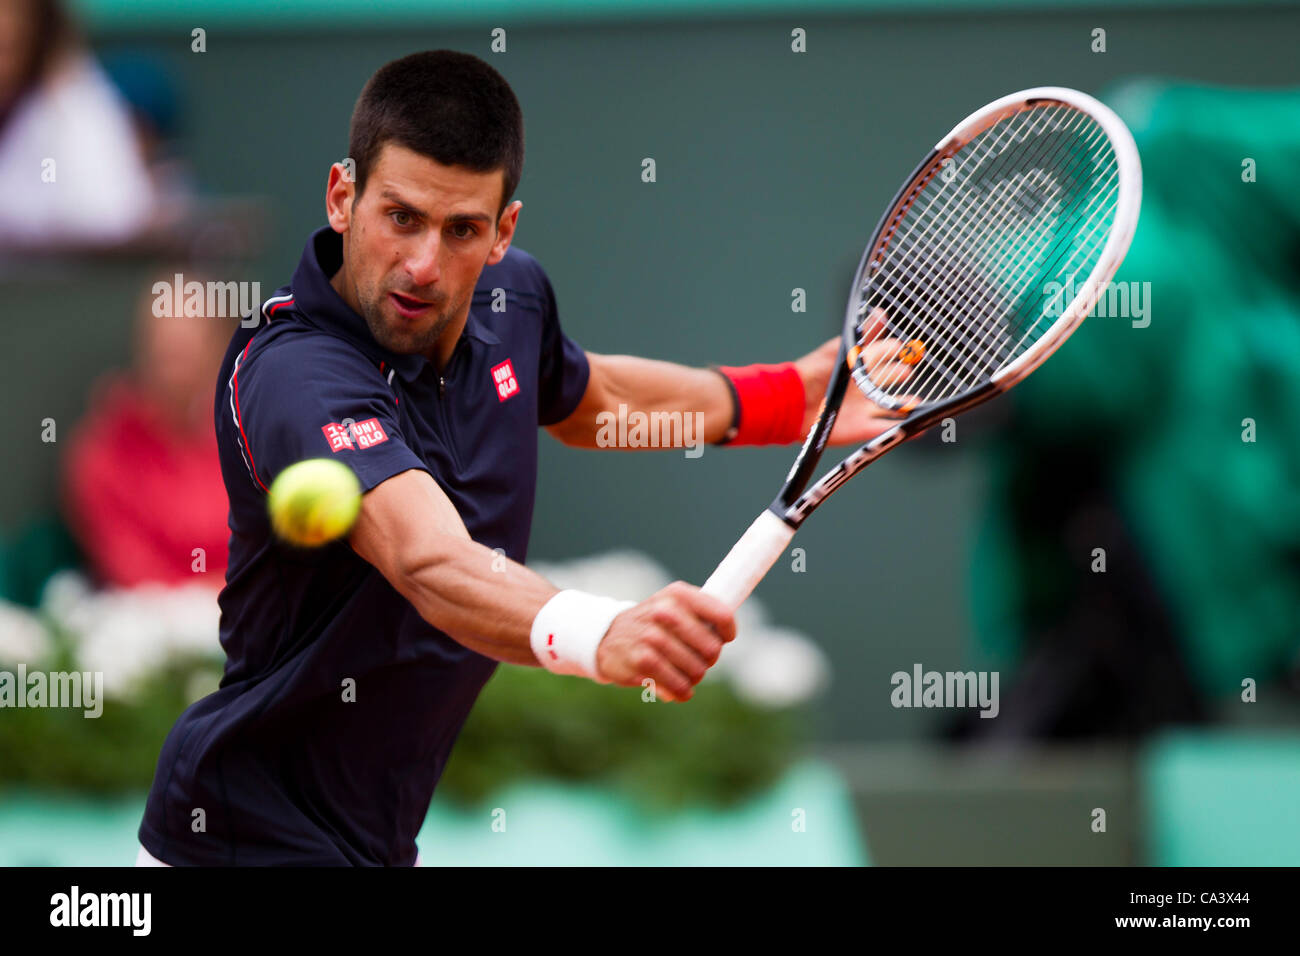 03.06.2012 Paris, France. Novak Djokovic in action against Andreas Seppi on day 8 of the French Open Tennis from Roland Garros. Stock Photo